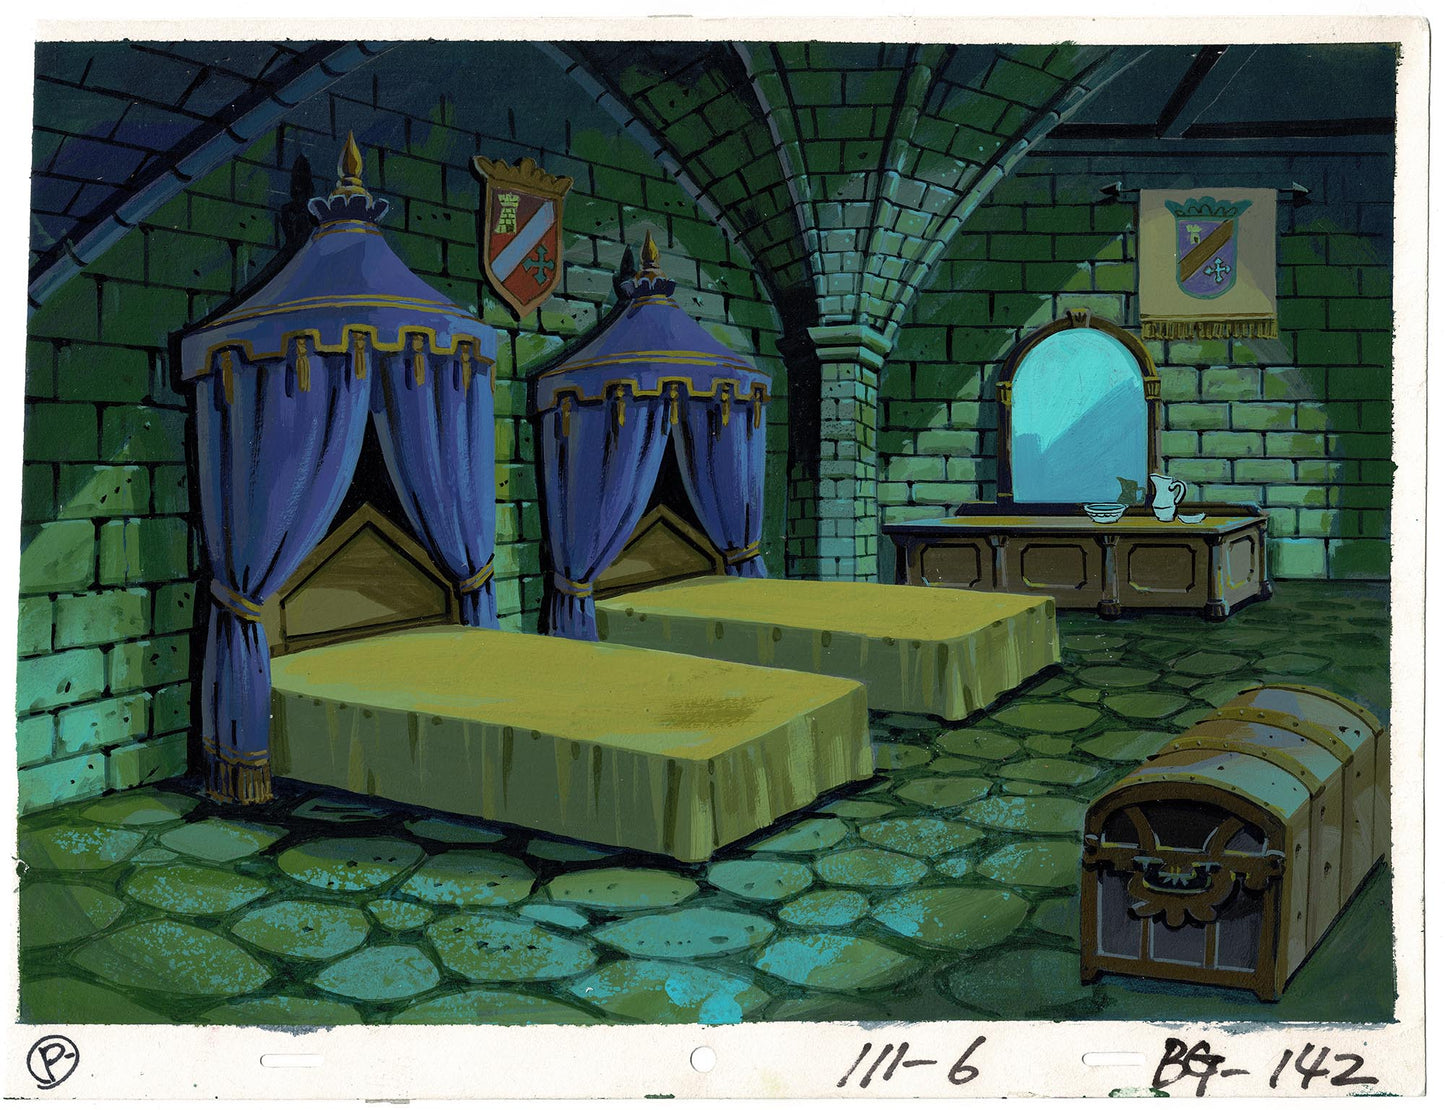 SCOOBY DOO 1978 Third Season Animation Production Background from Hanna Barbera Episode 6